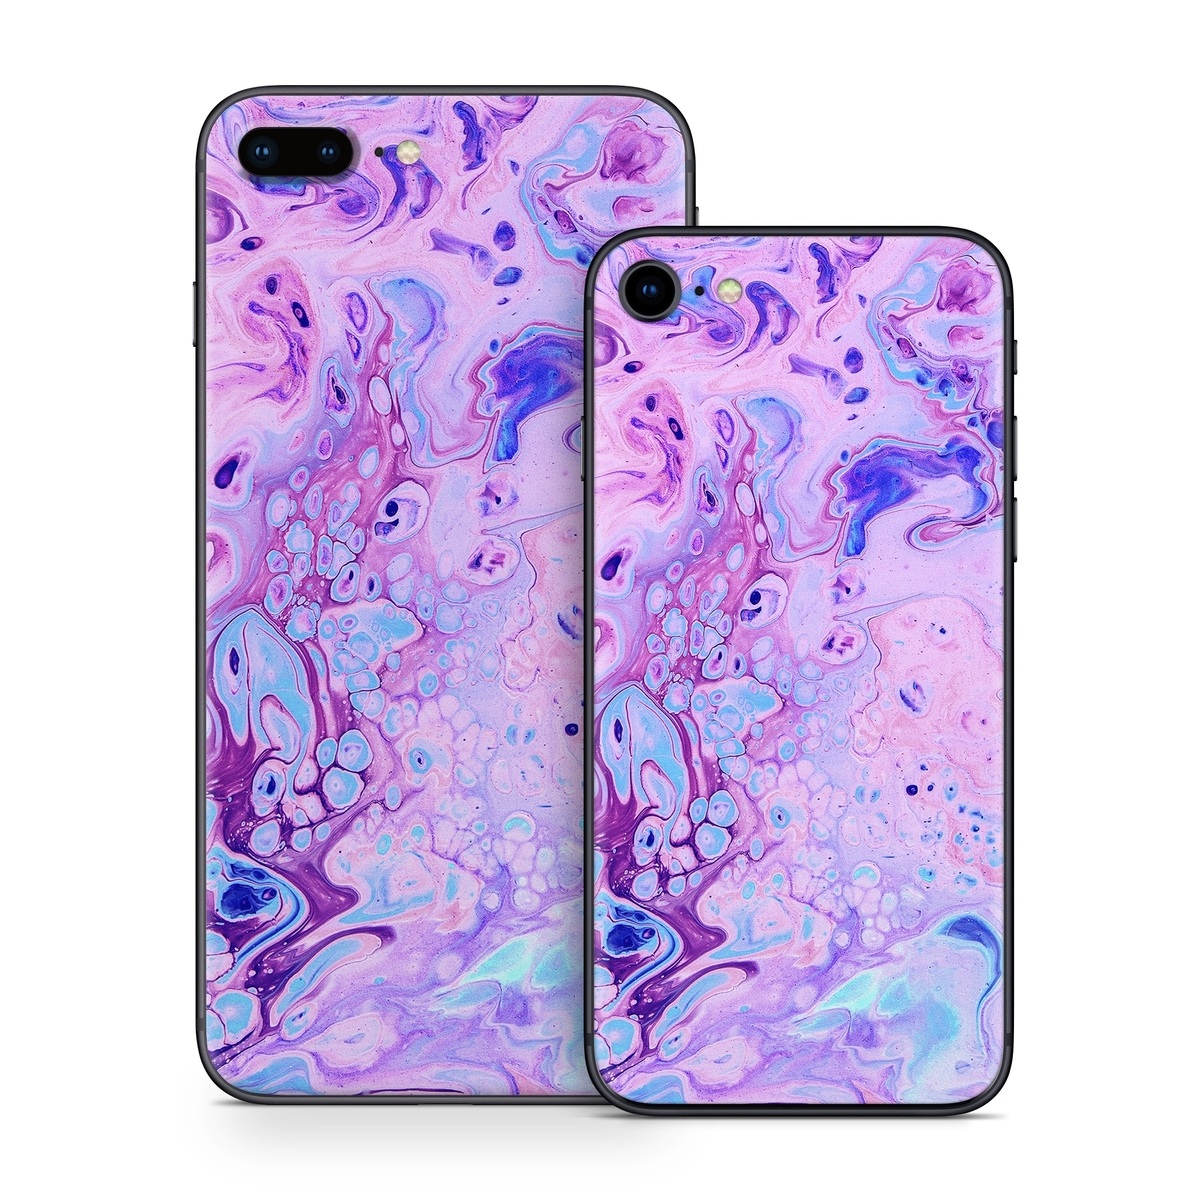 iPhone 8 Series Skin design of Purple, Violet, Lilac, Art, Pattern, Modern art, Painting, Visual arts, Acrylic paint, Magenta, with pink, purple, blue colors